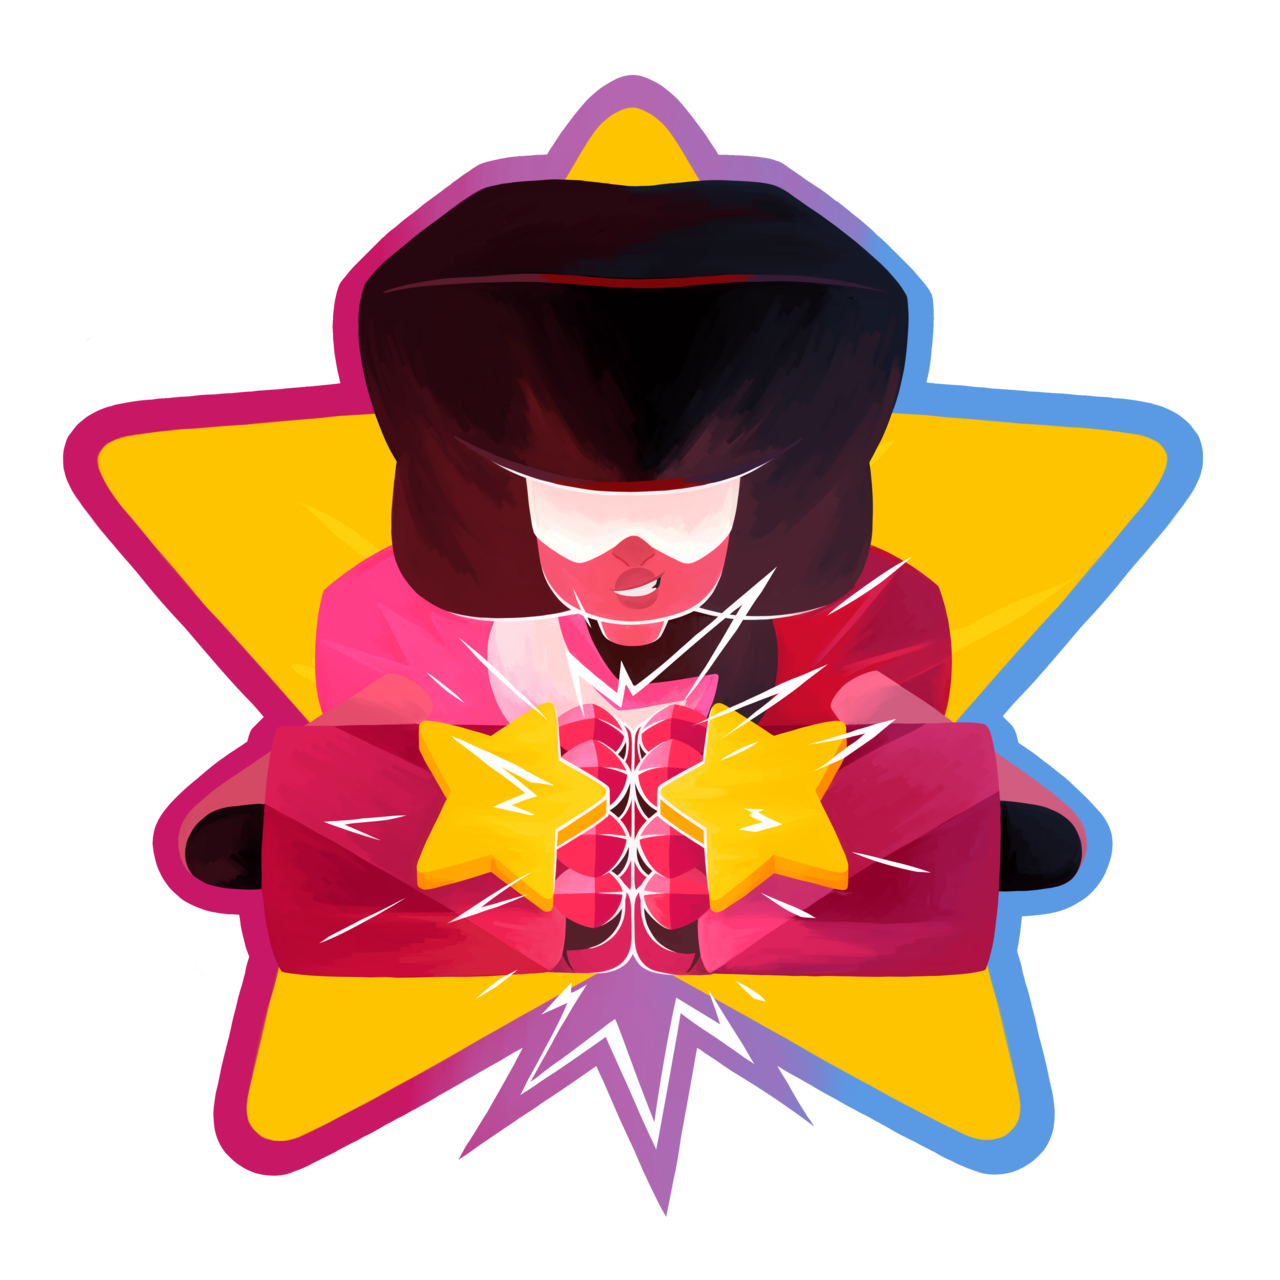 #037 Garnet revisit Whoops. This went from a little touch up to completely redoing the background. Ah well, it looks much better now.